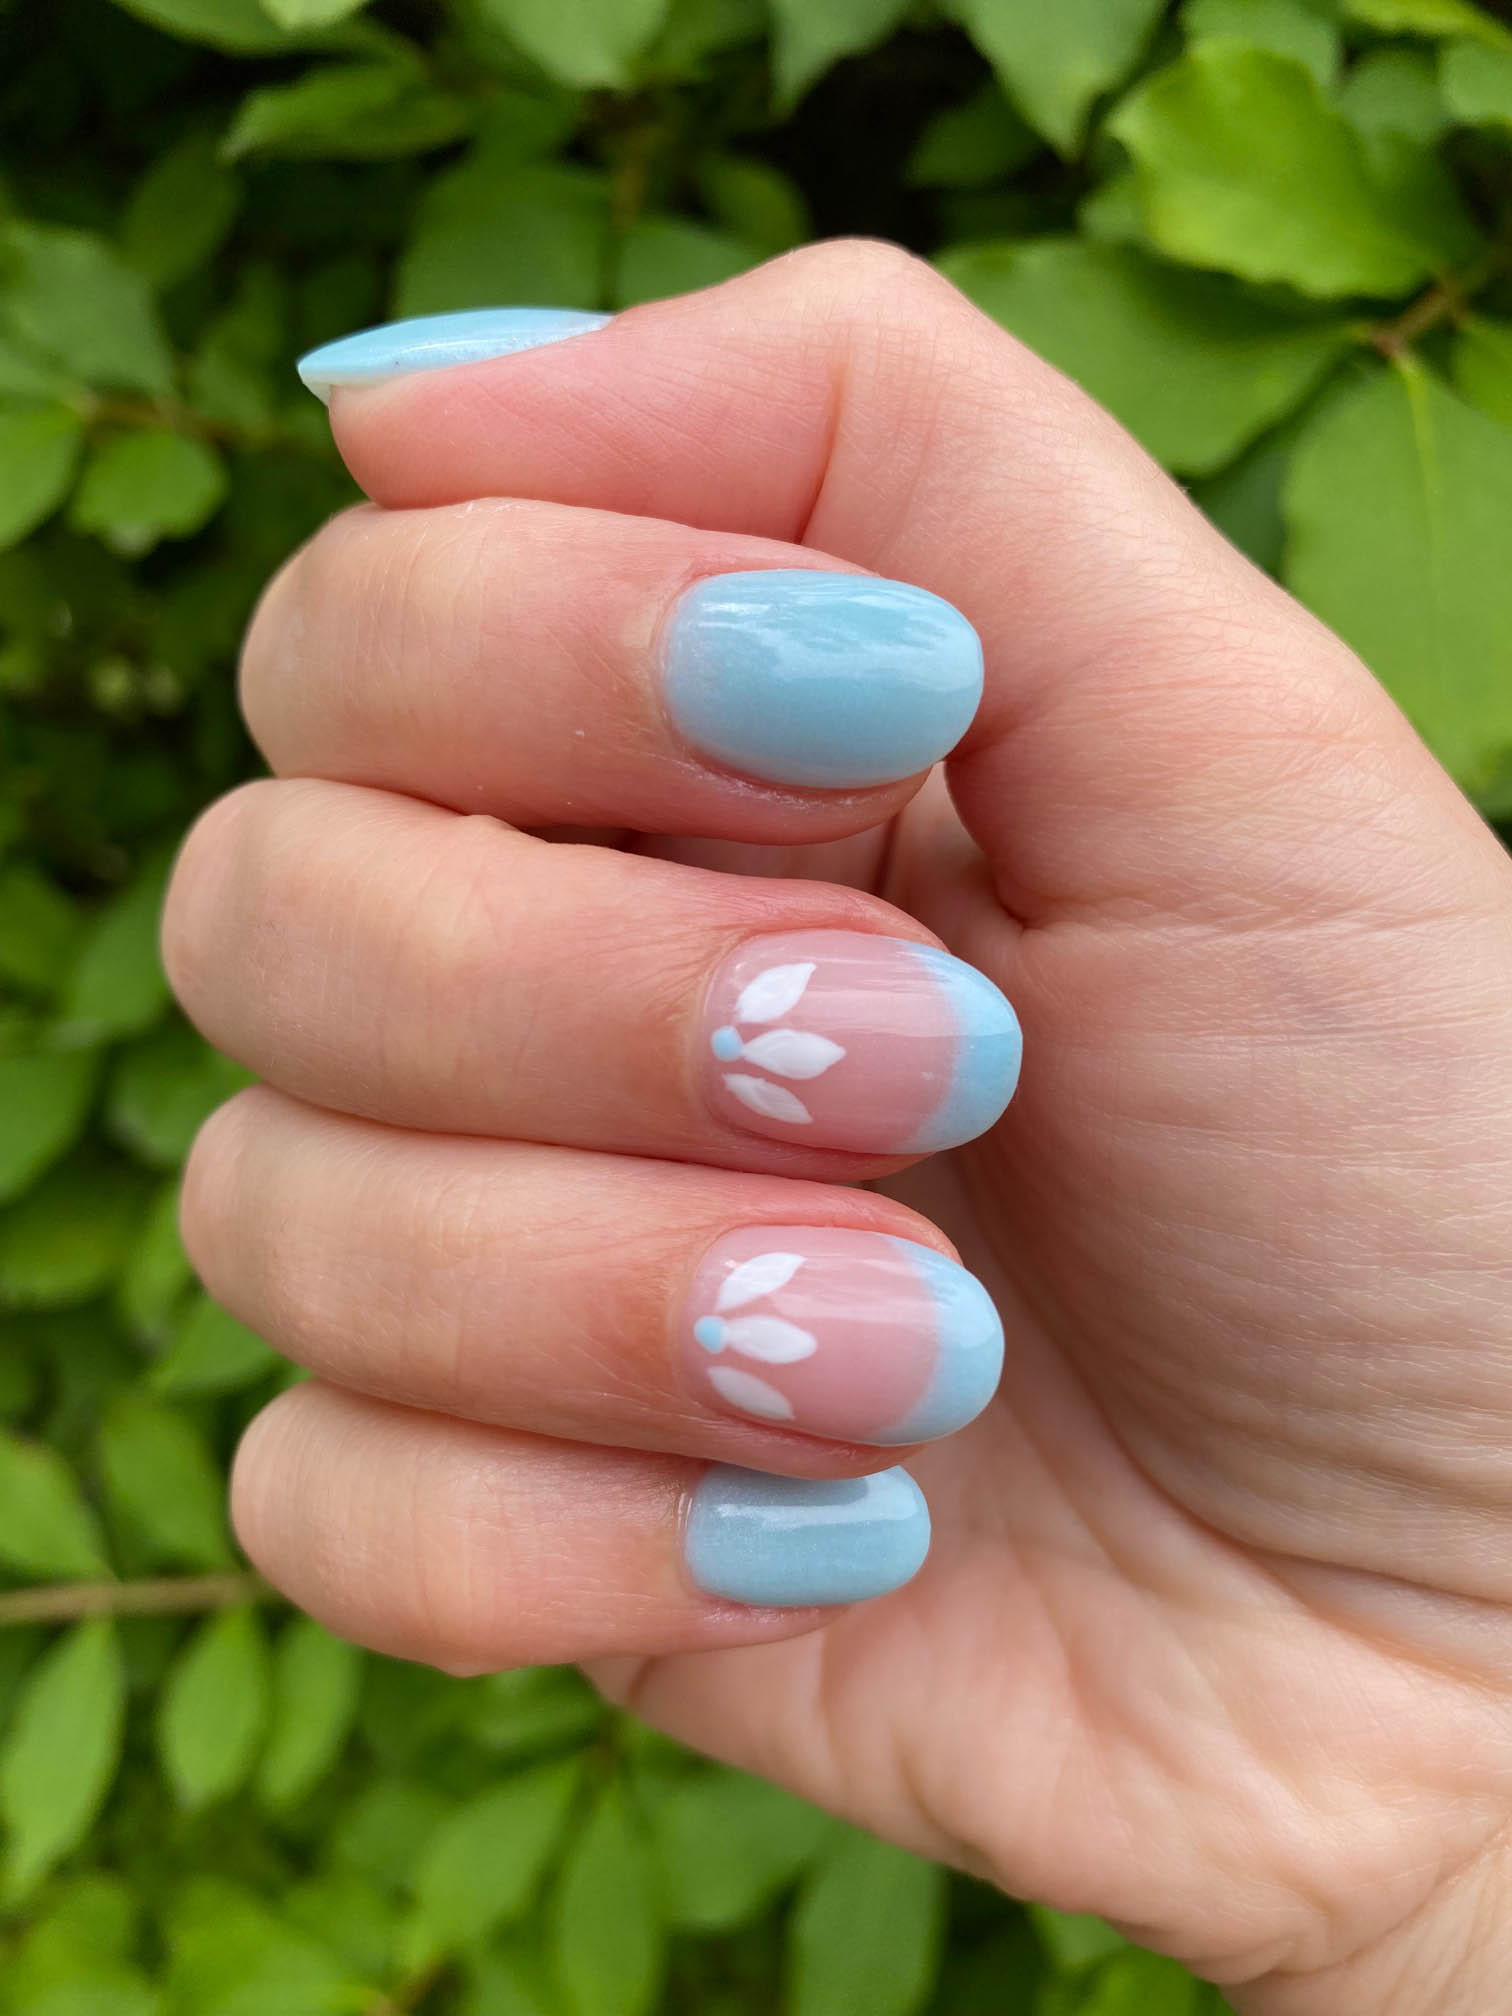 Lotus Flower Nail Design Blue And White Manicure